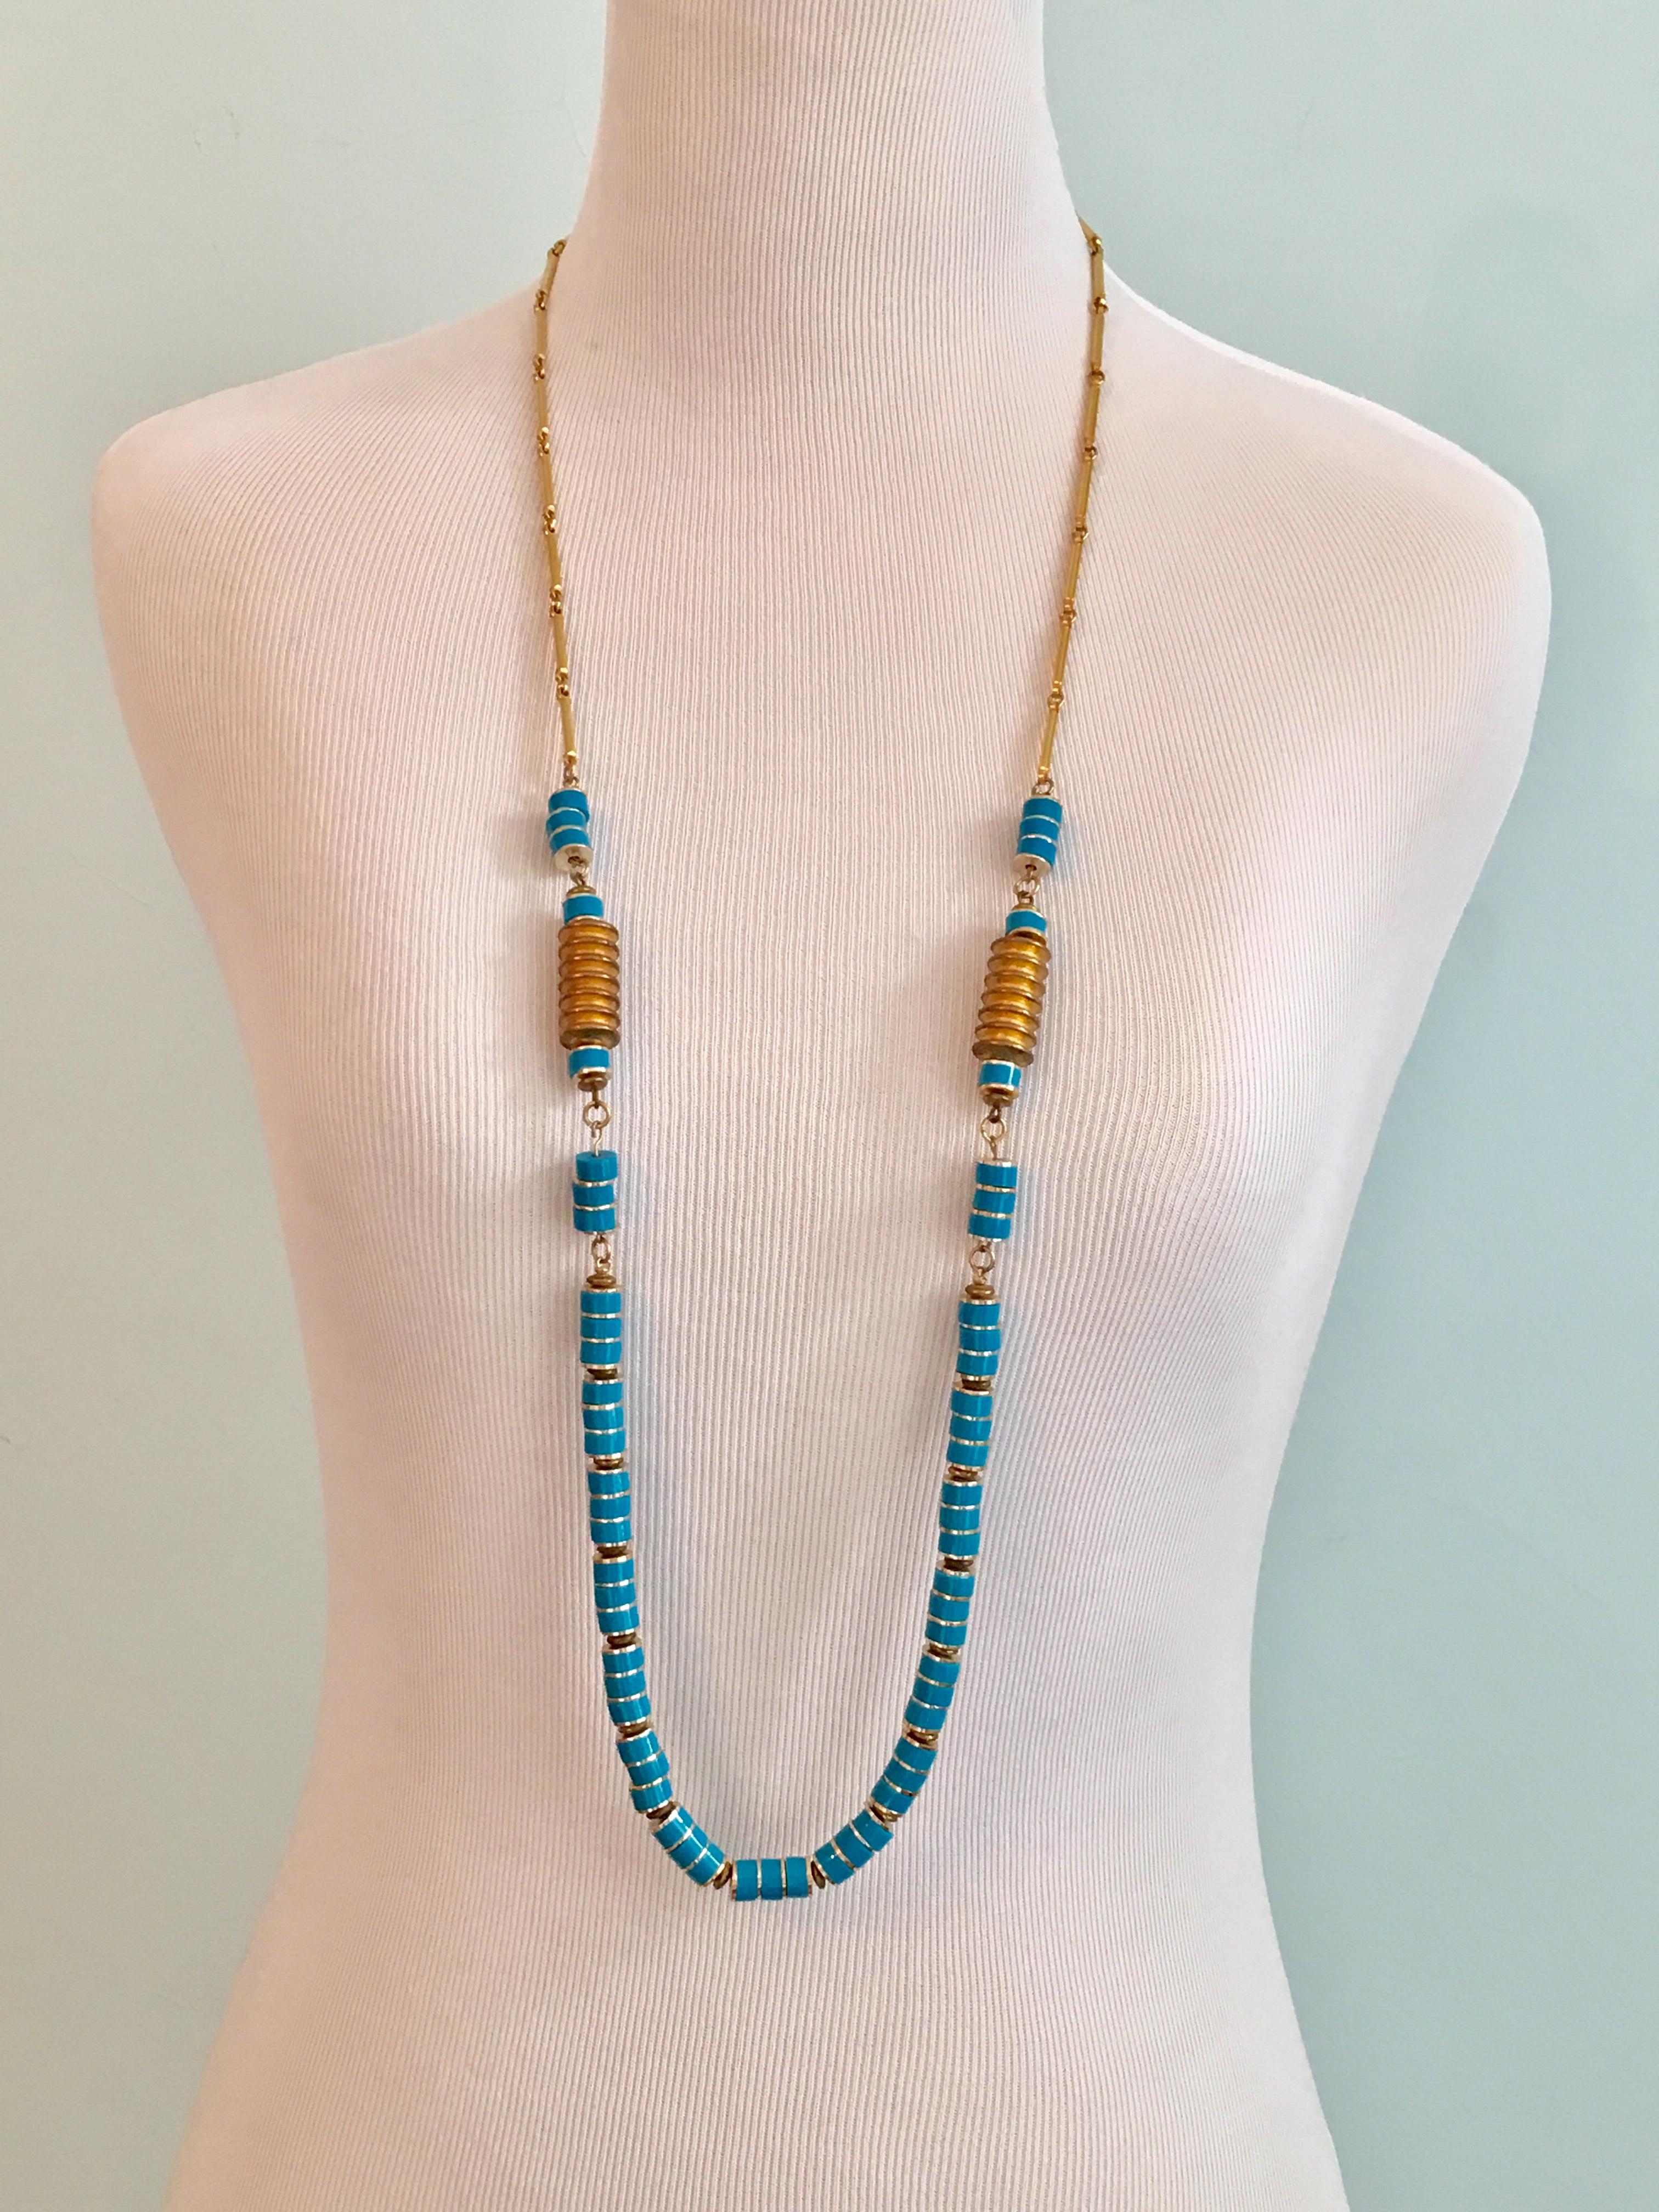 Women's Pierre Cardin Turquoise Colored Beaded Necklace, 1970s